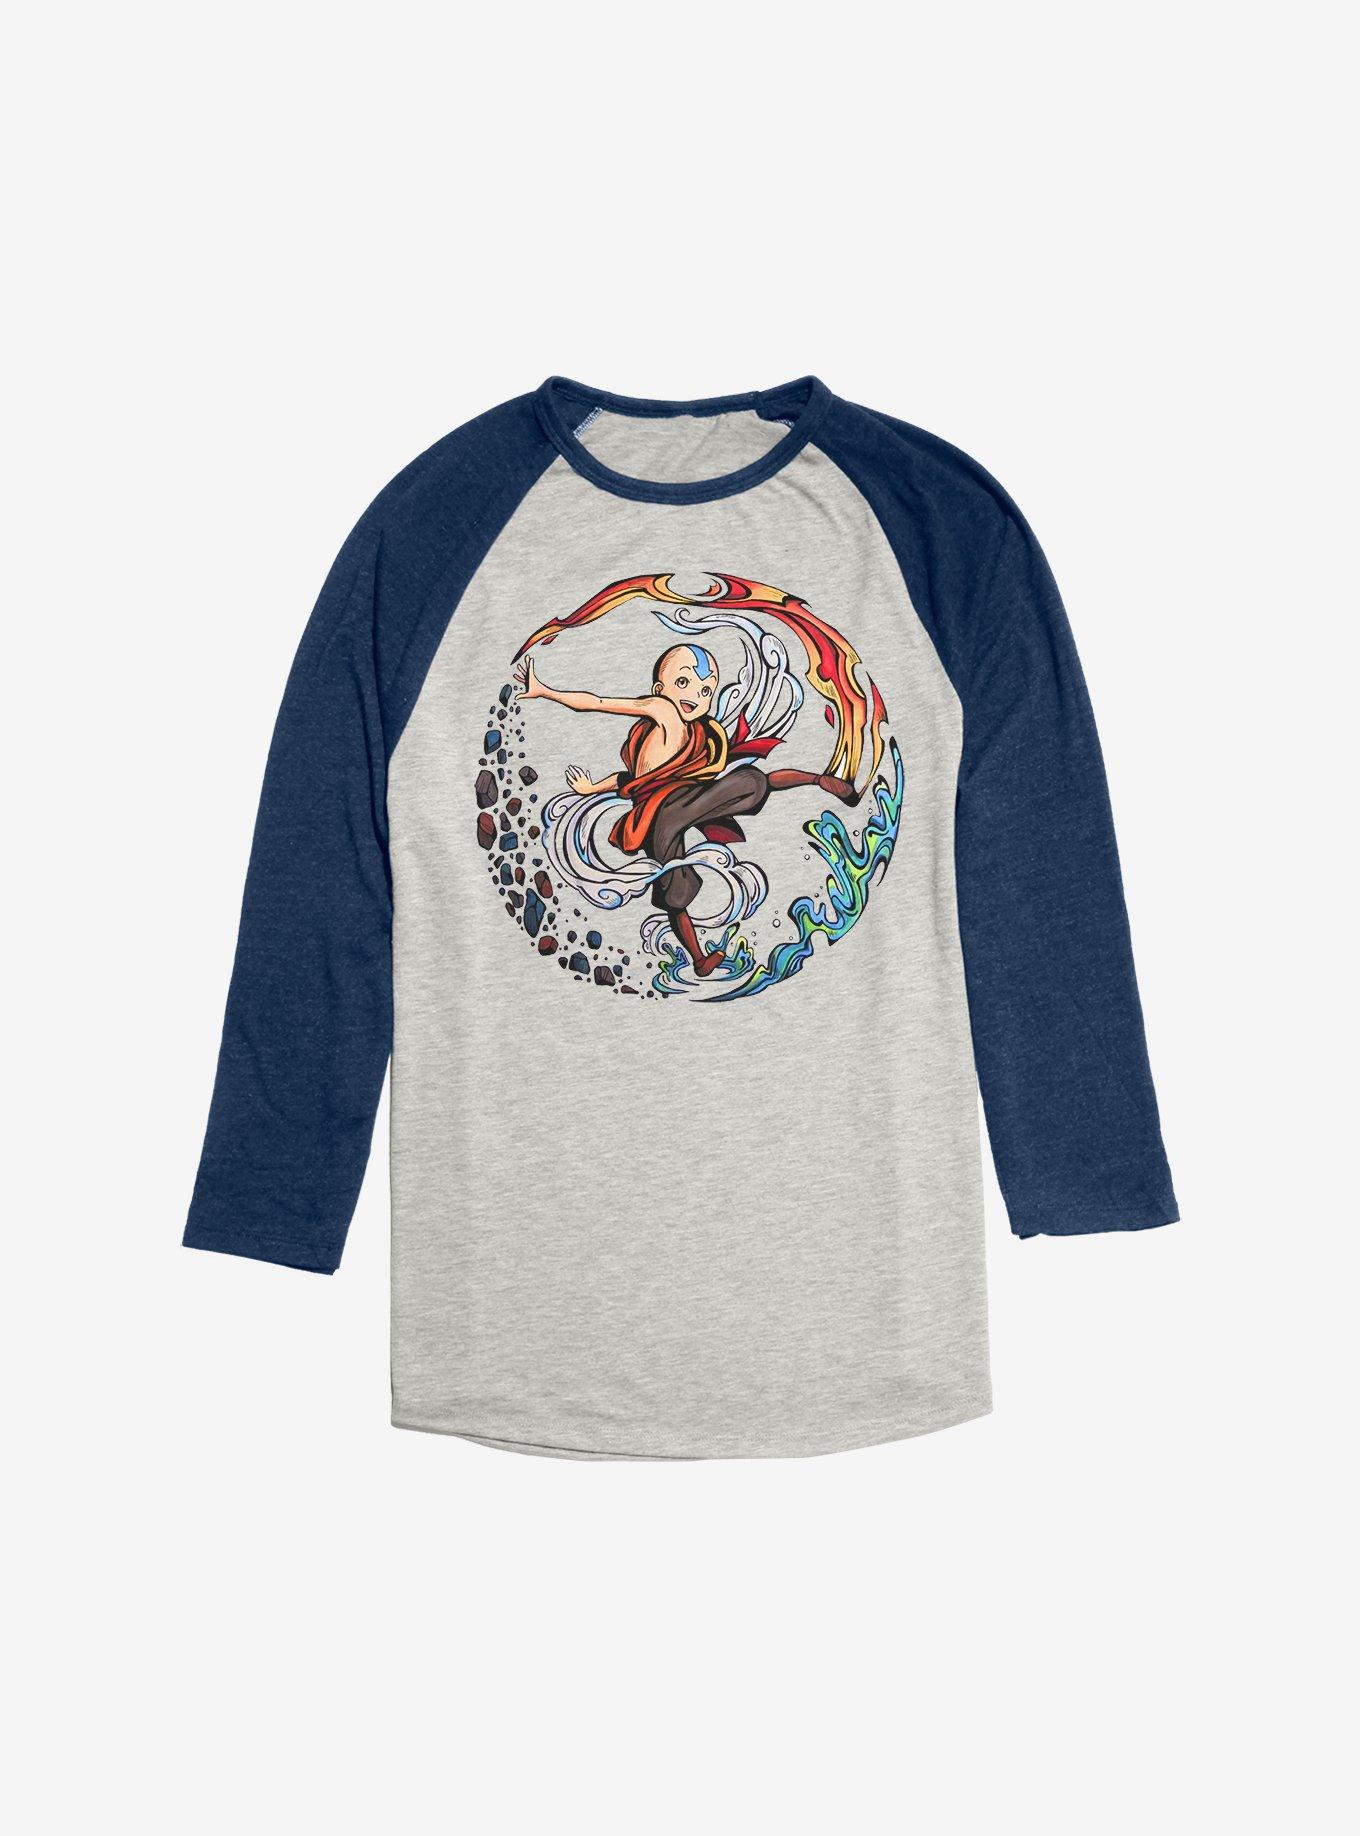 Avatar: The Last Airbender Aang The Avatar Raglan, Oatmeal With Navy, hi-res